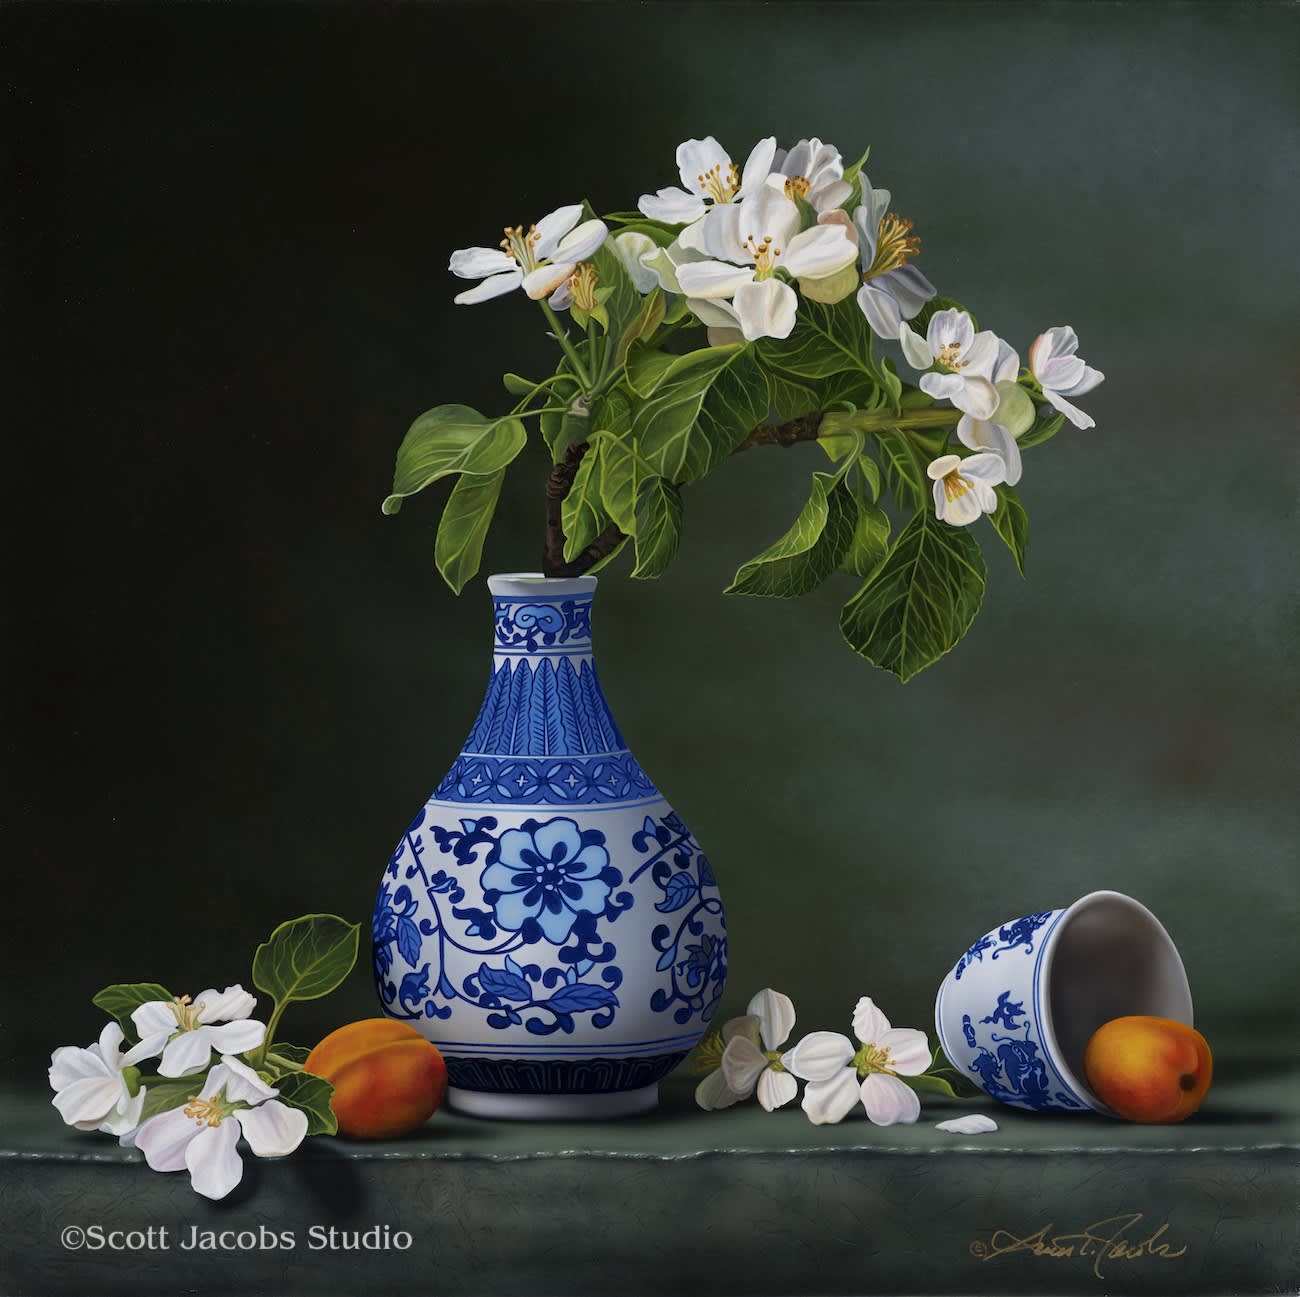 Kan ikke lide transfusion Kilde Flowers of Apples and Apricots | Lifestyle Art | Scott Jacobs Gallery